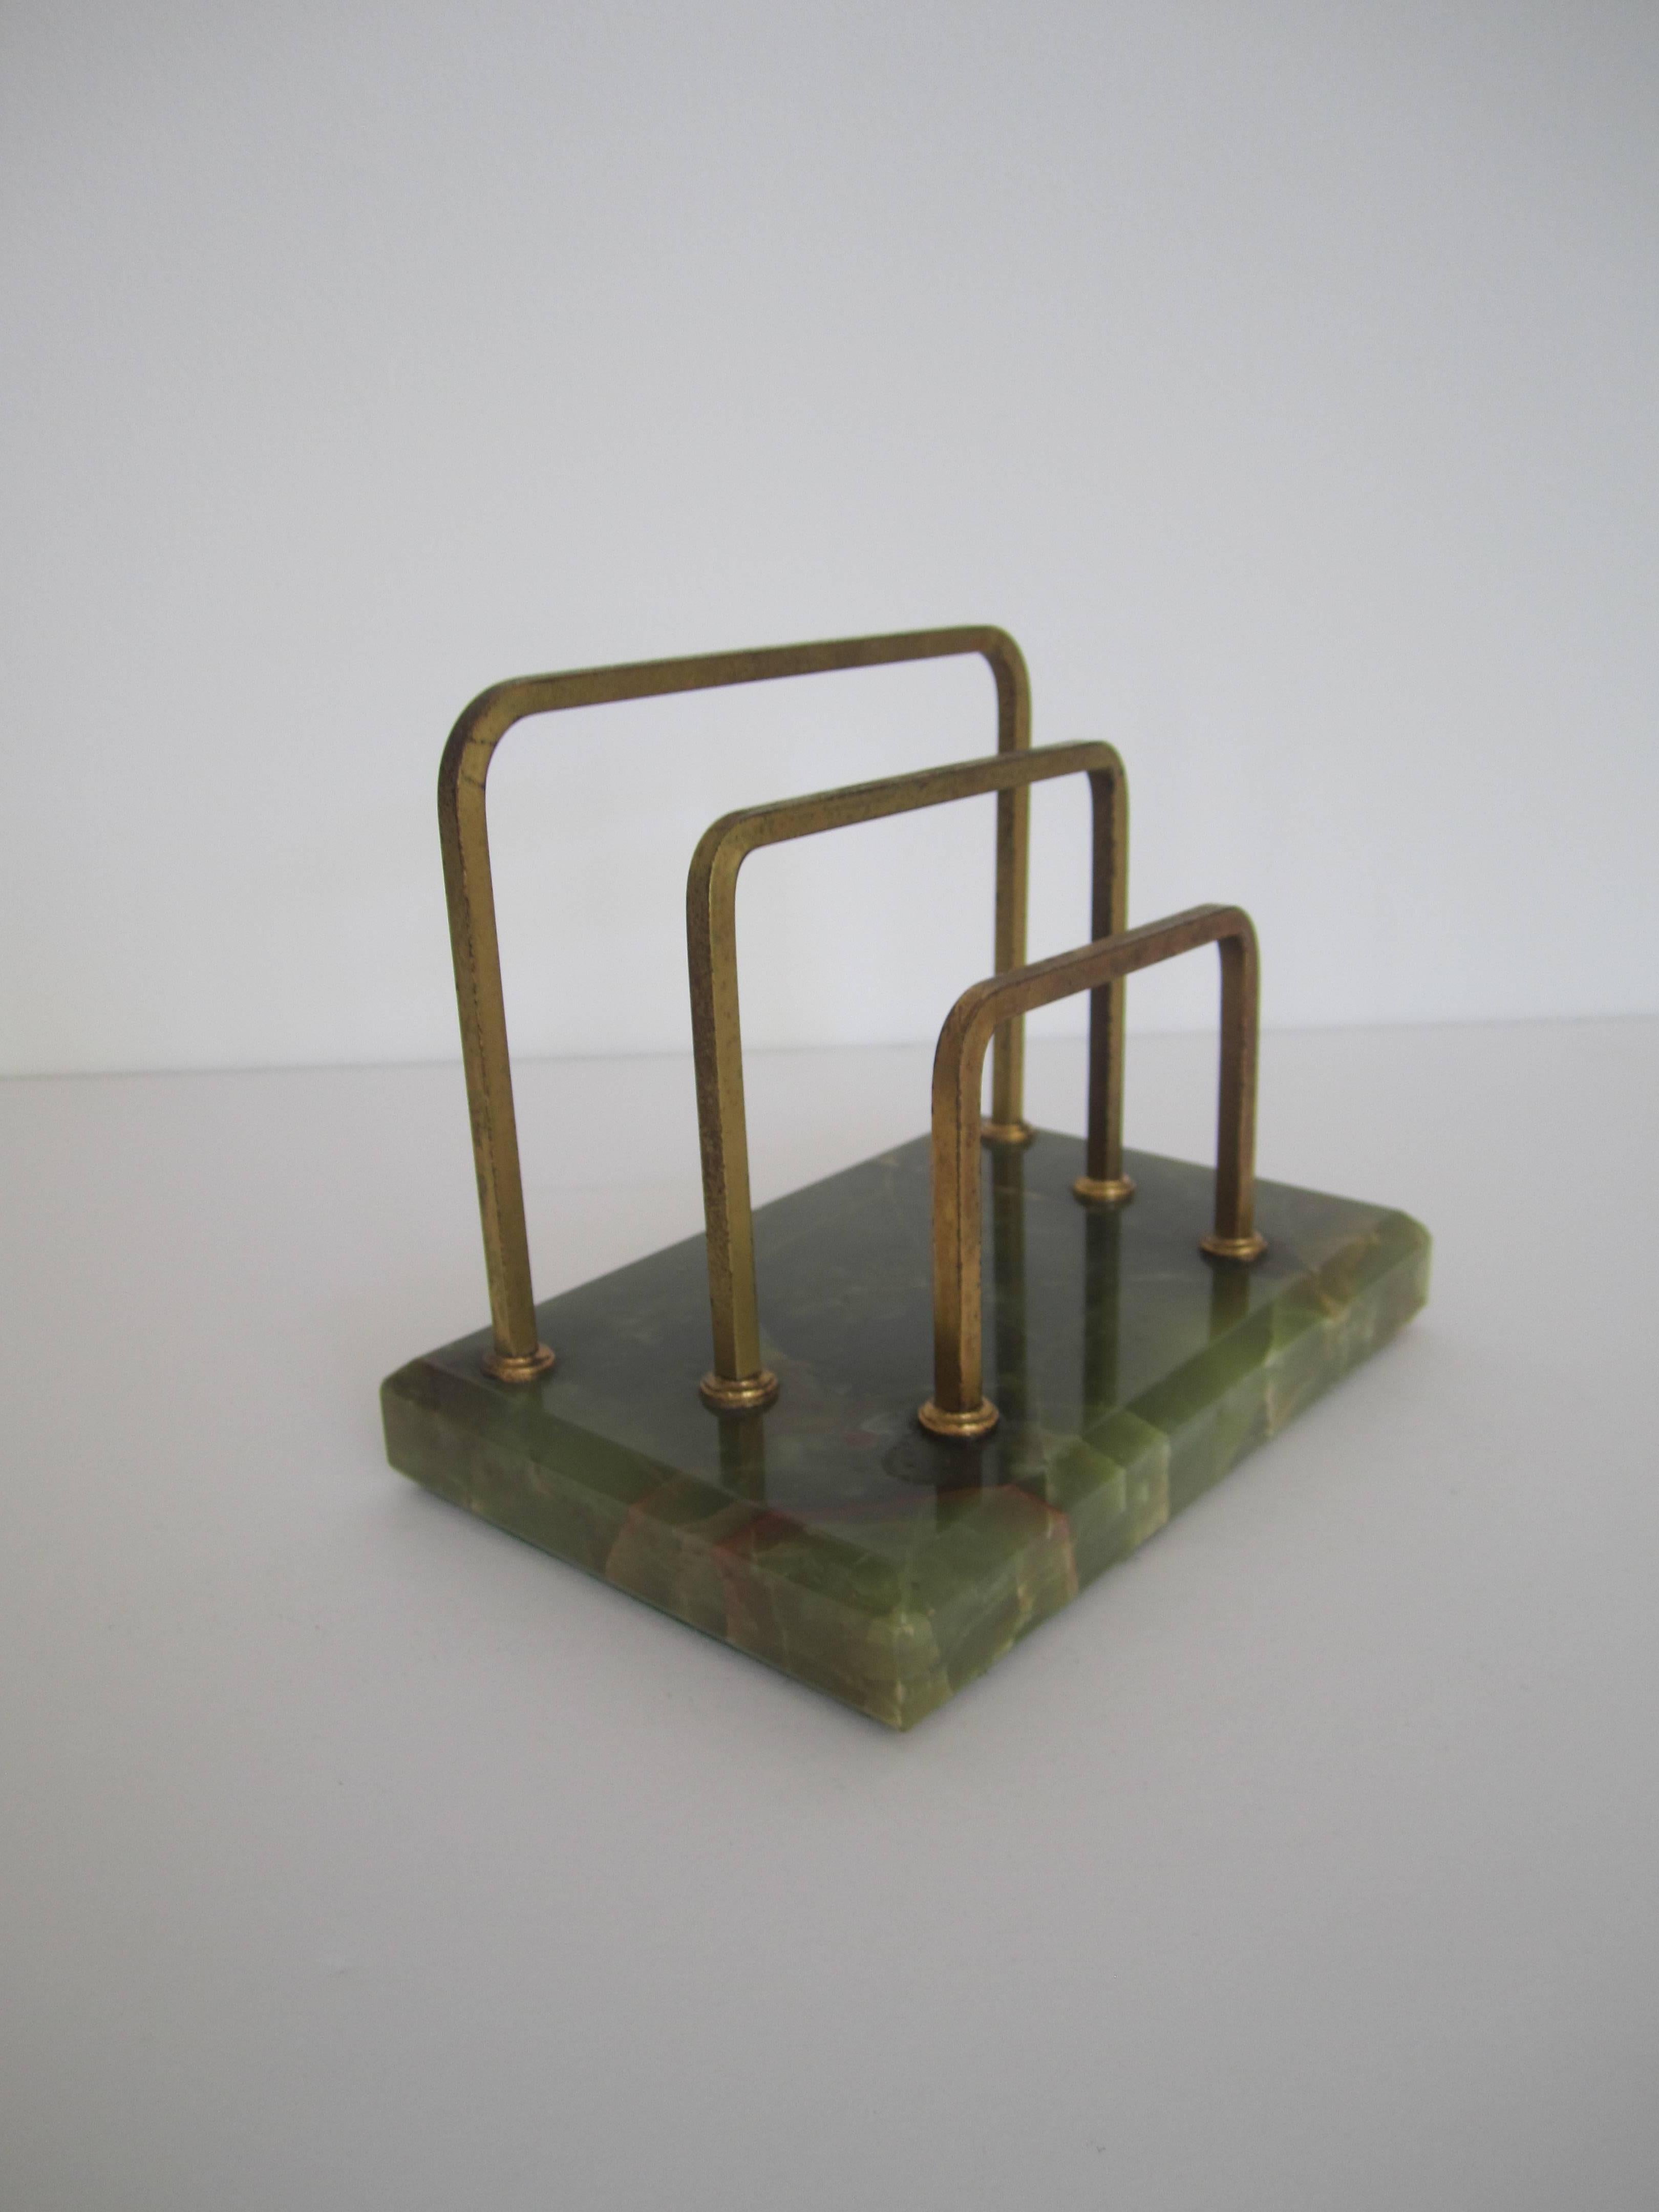 Vintage Brass and Green Onyx Mail or Letter Desk Organizer 1